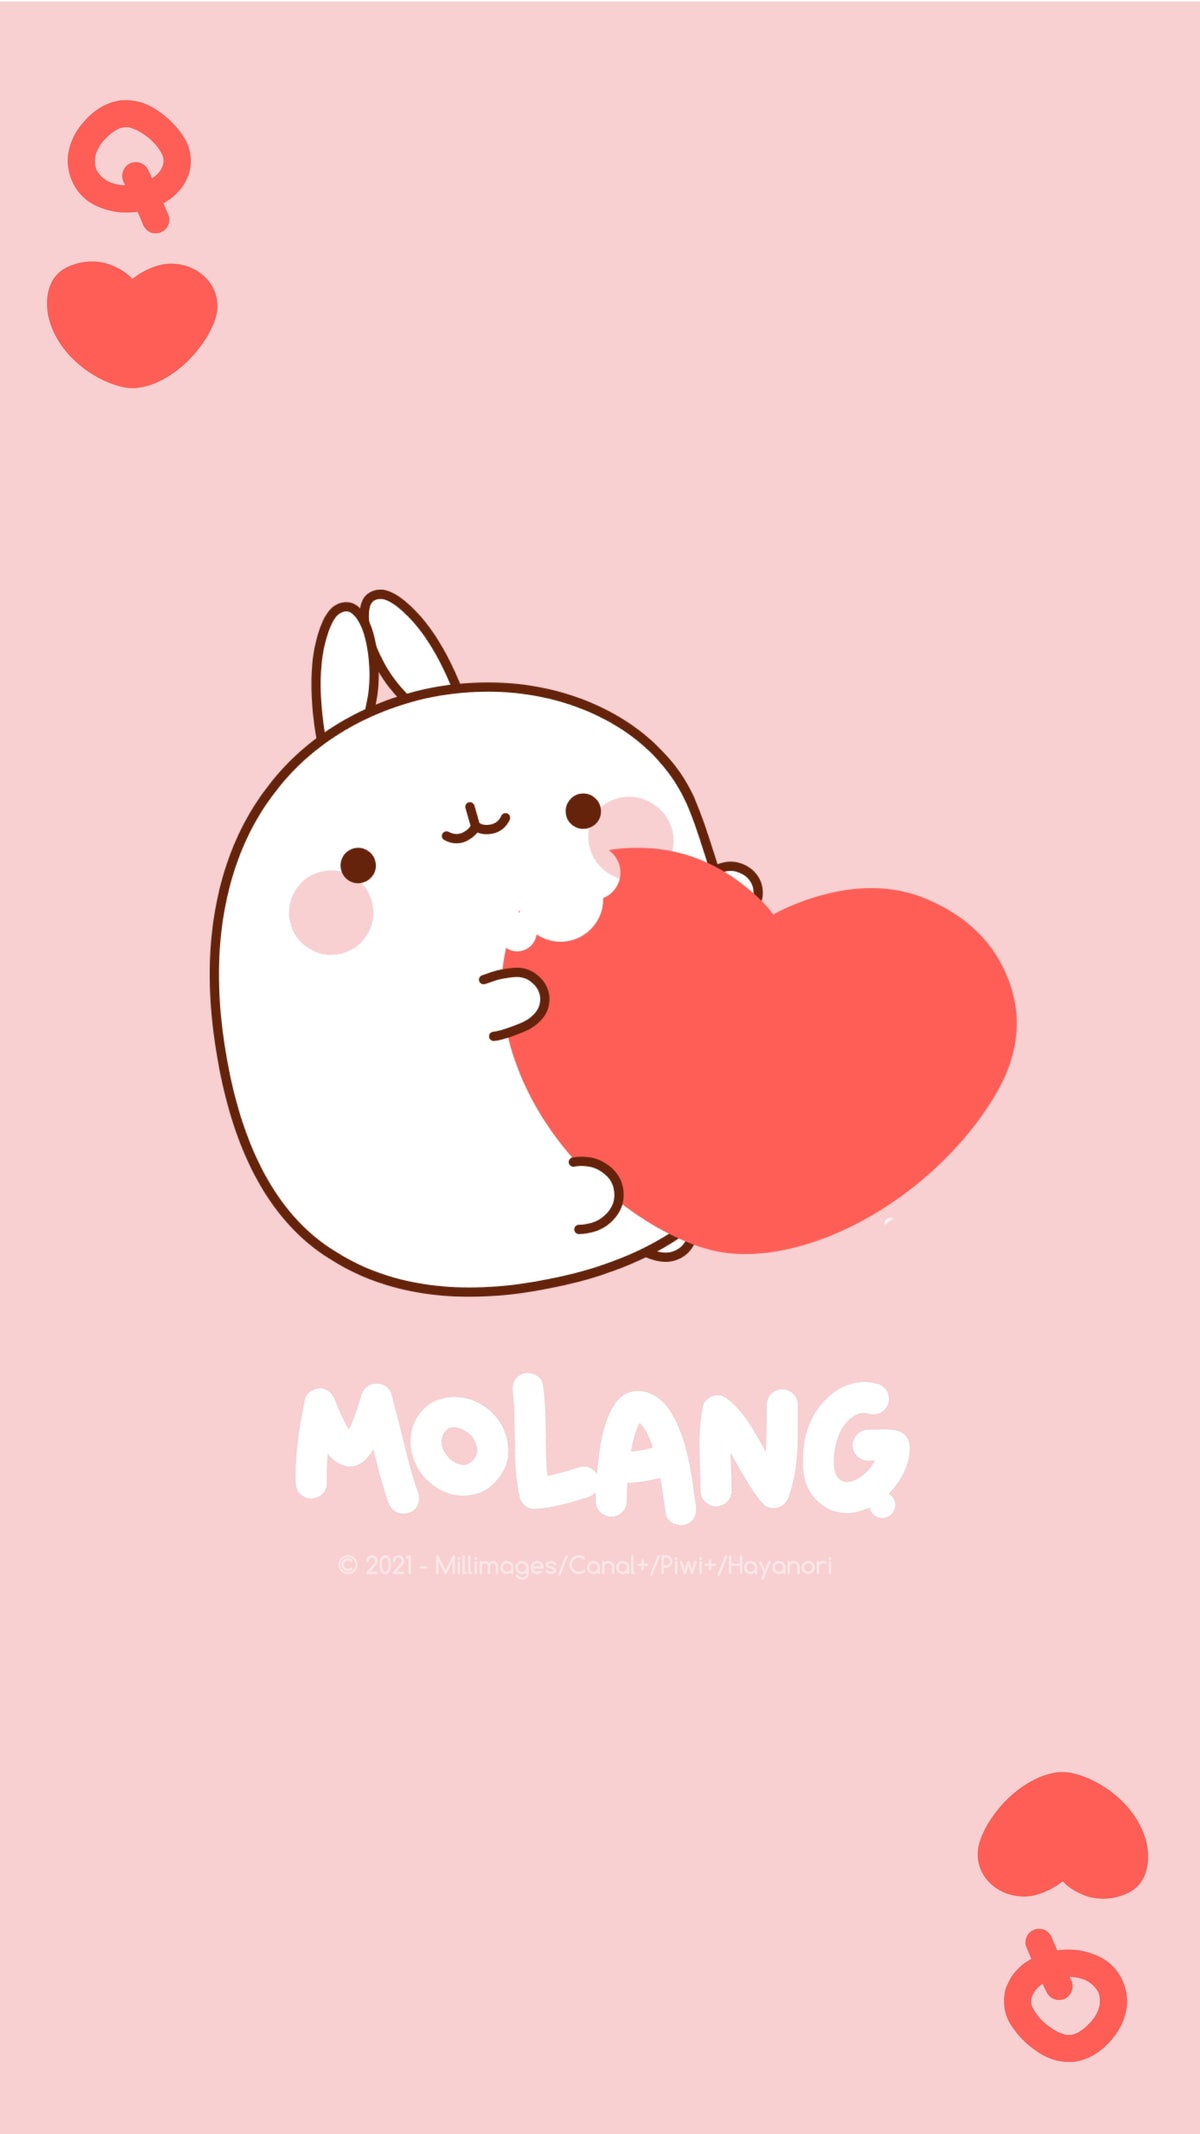 Molang Valentine's Day Wallpaper: Queen Card Wallpaper of Molang